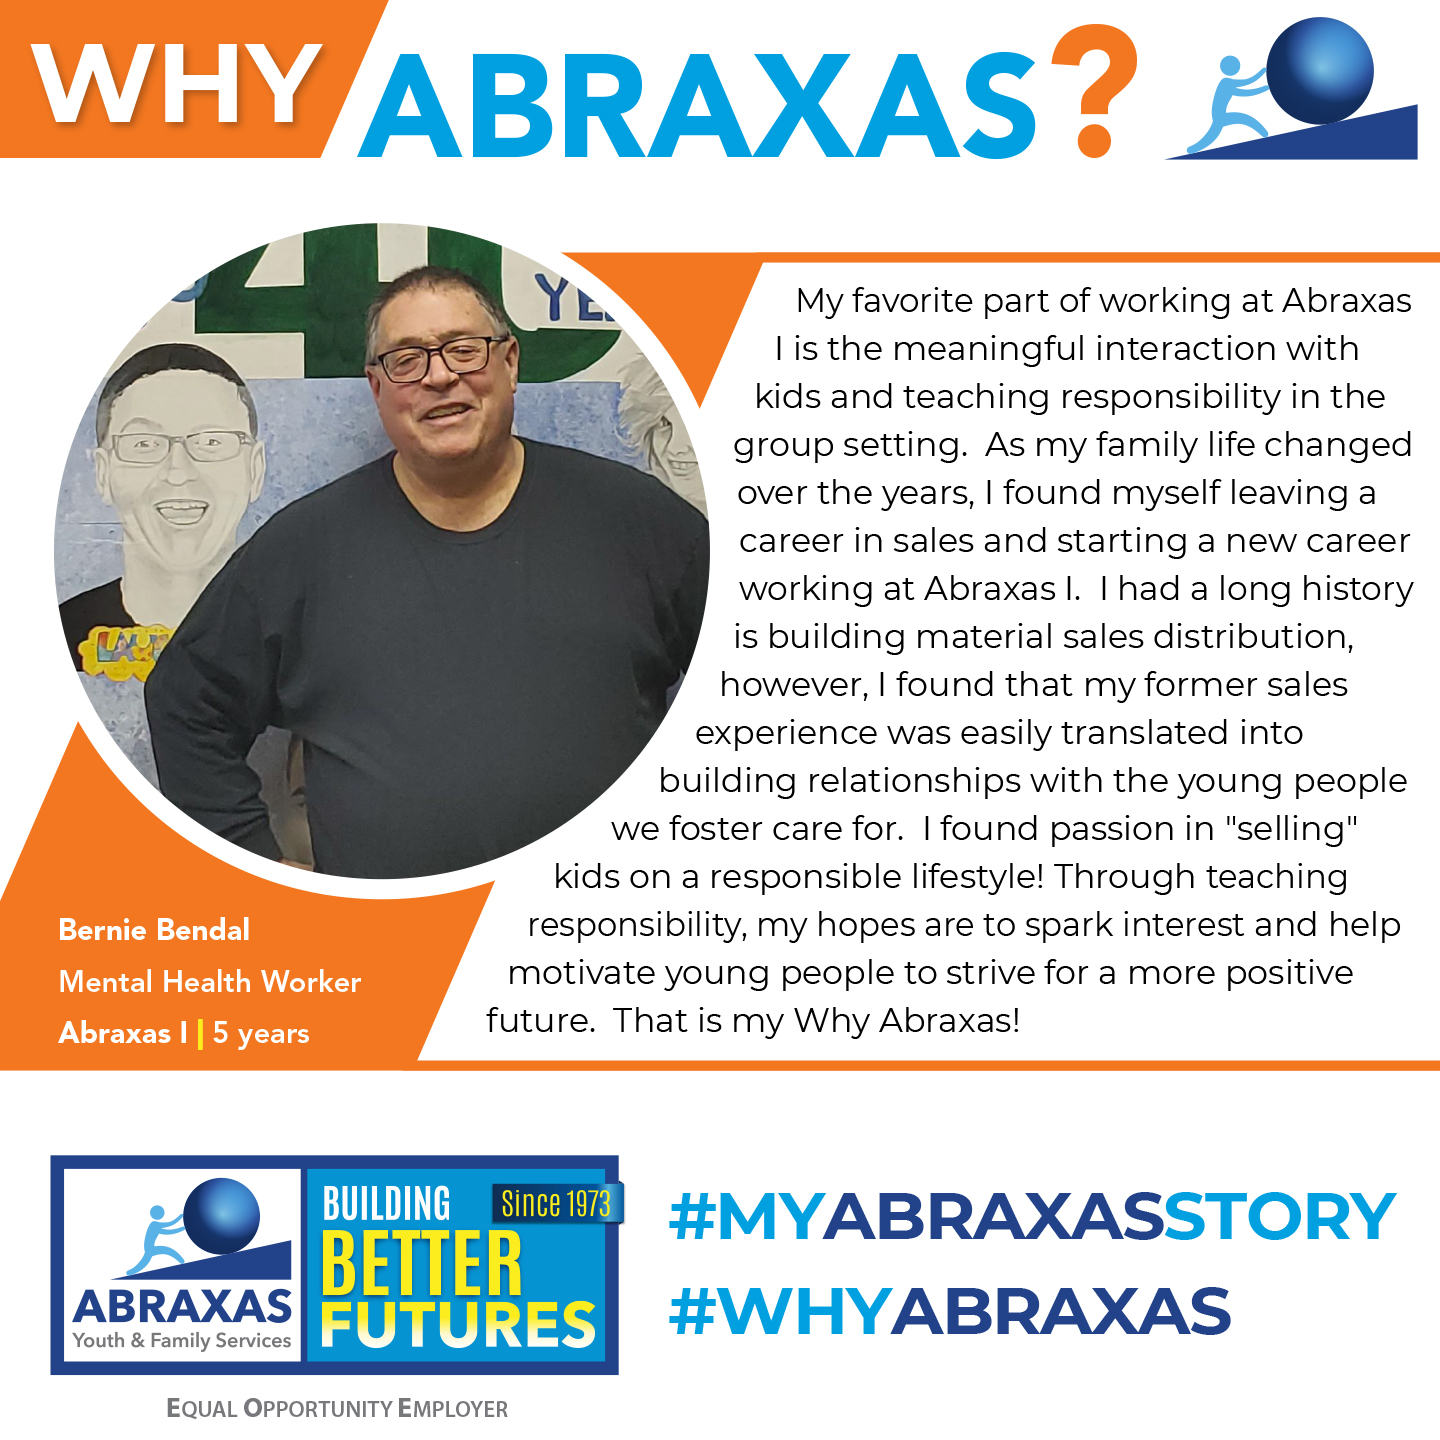 #WhyAbraxas